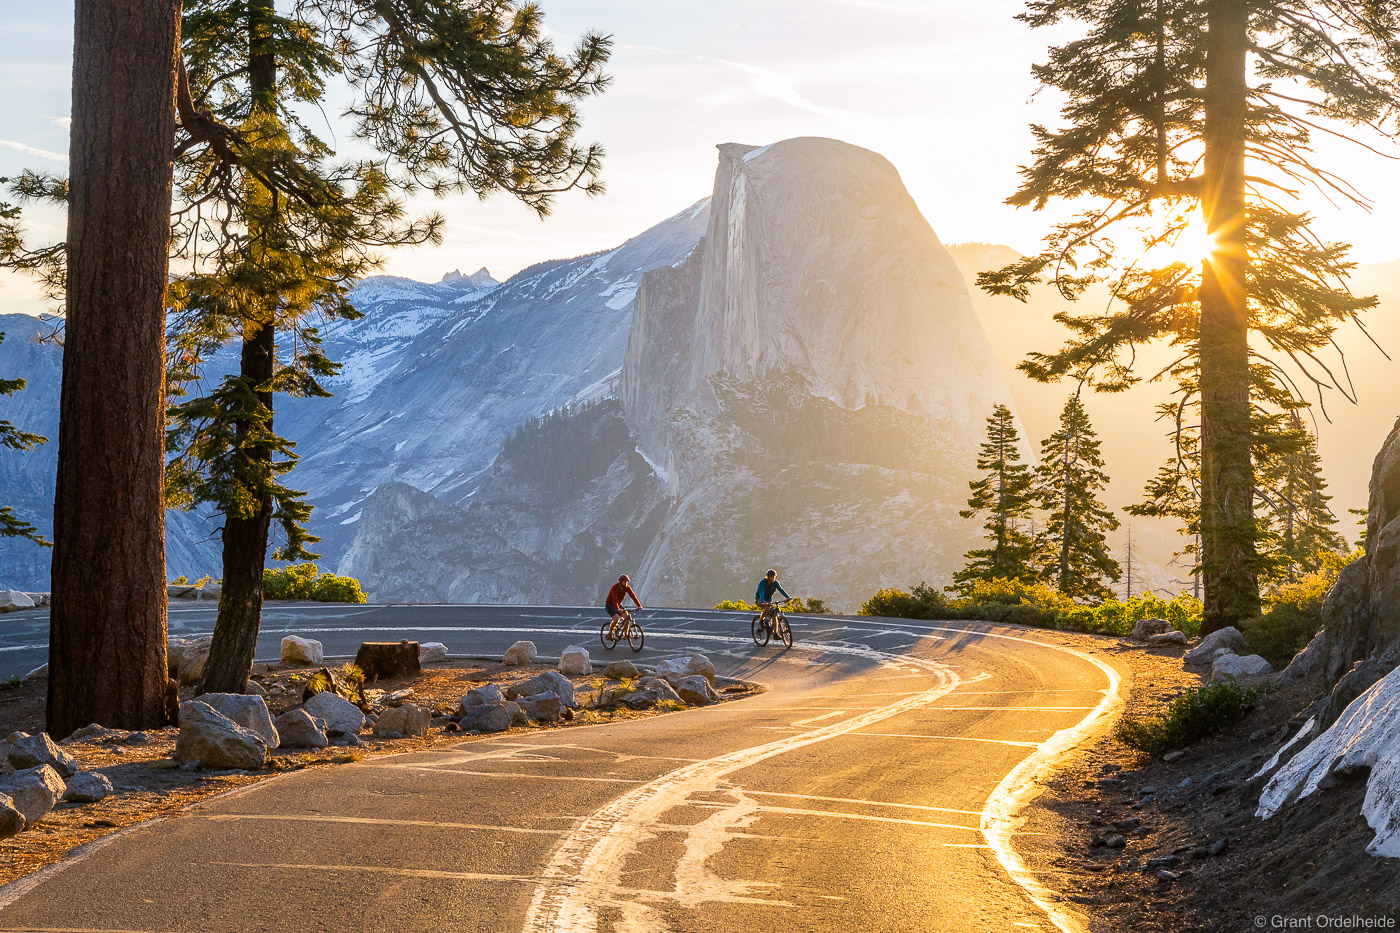 A pair of cyclists on the Glacier Point road in Yosemite National Park.